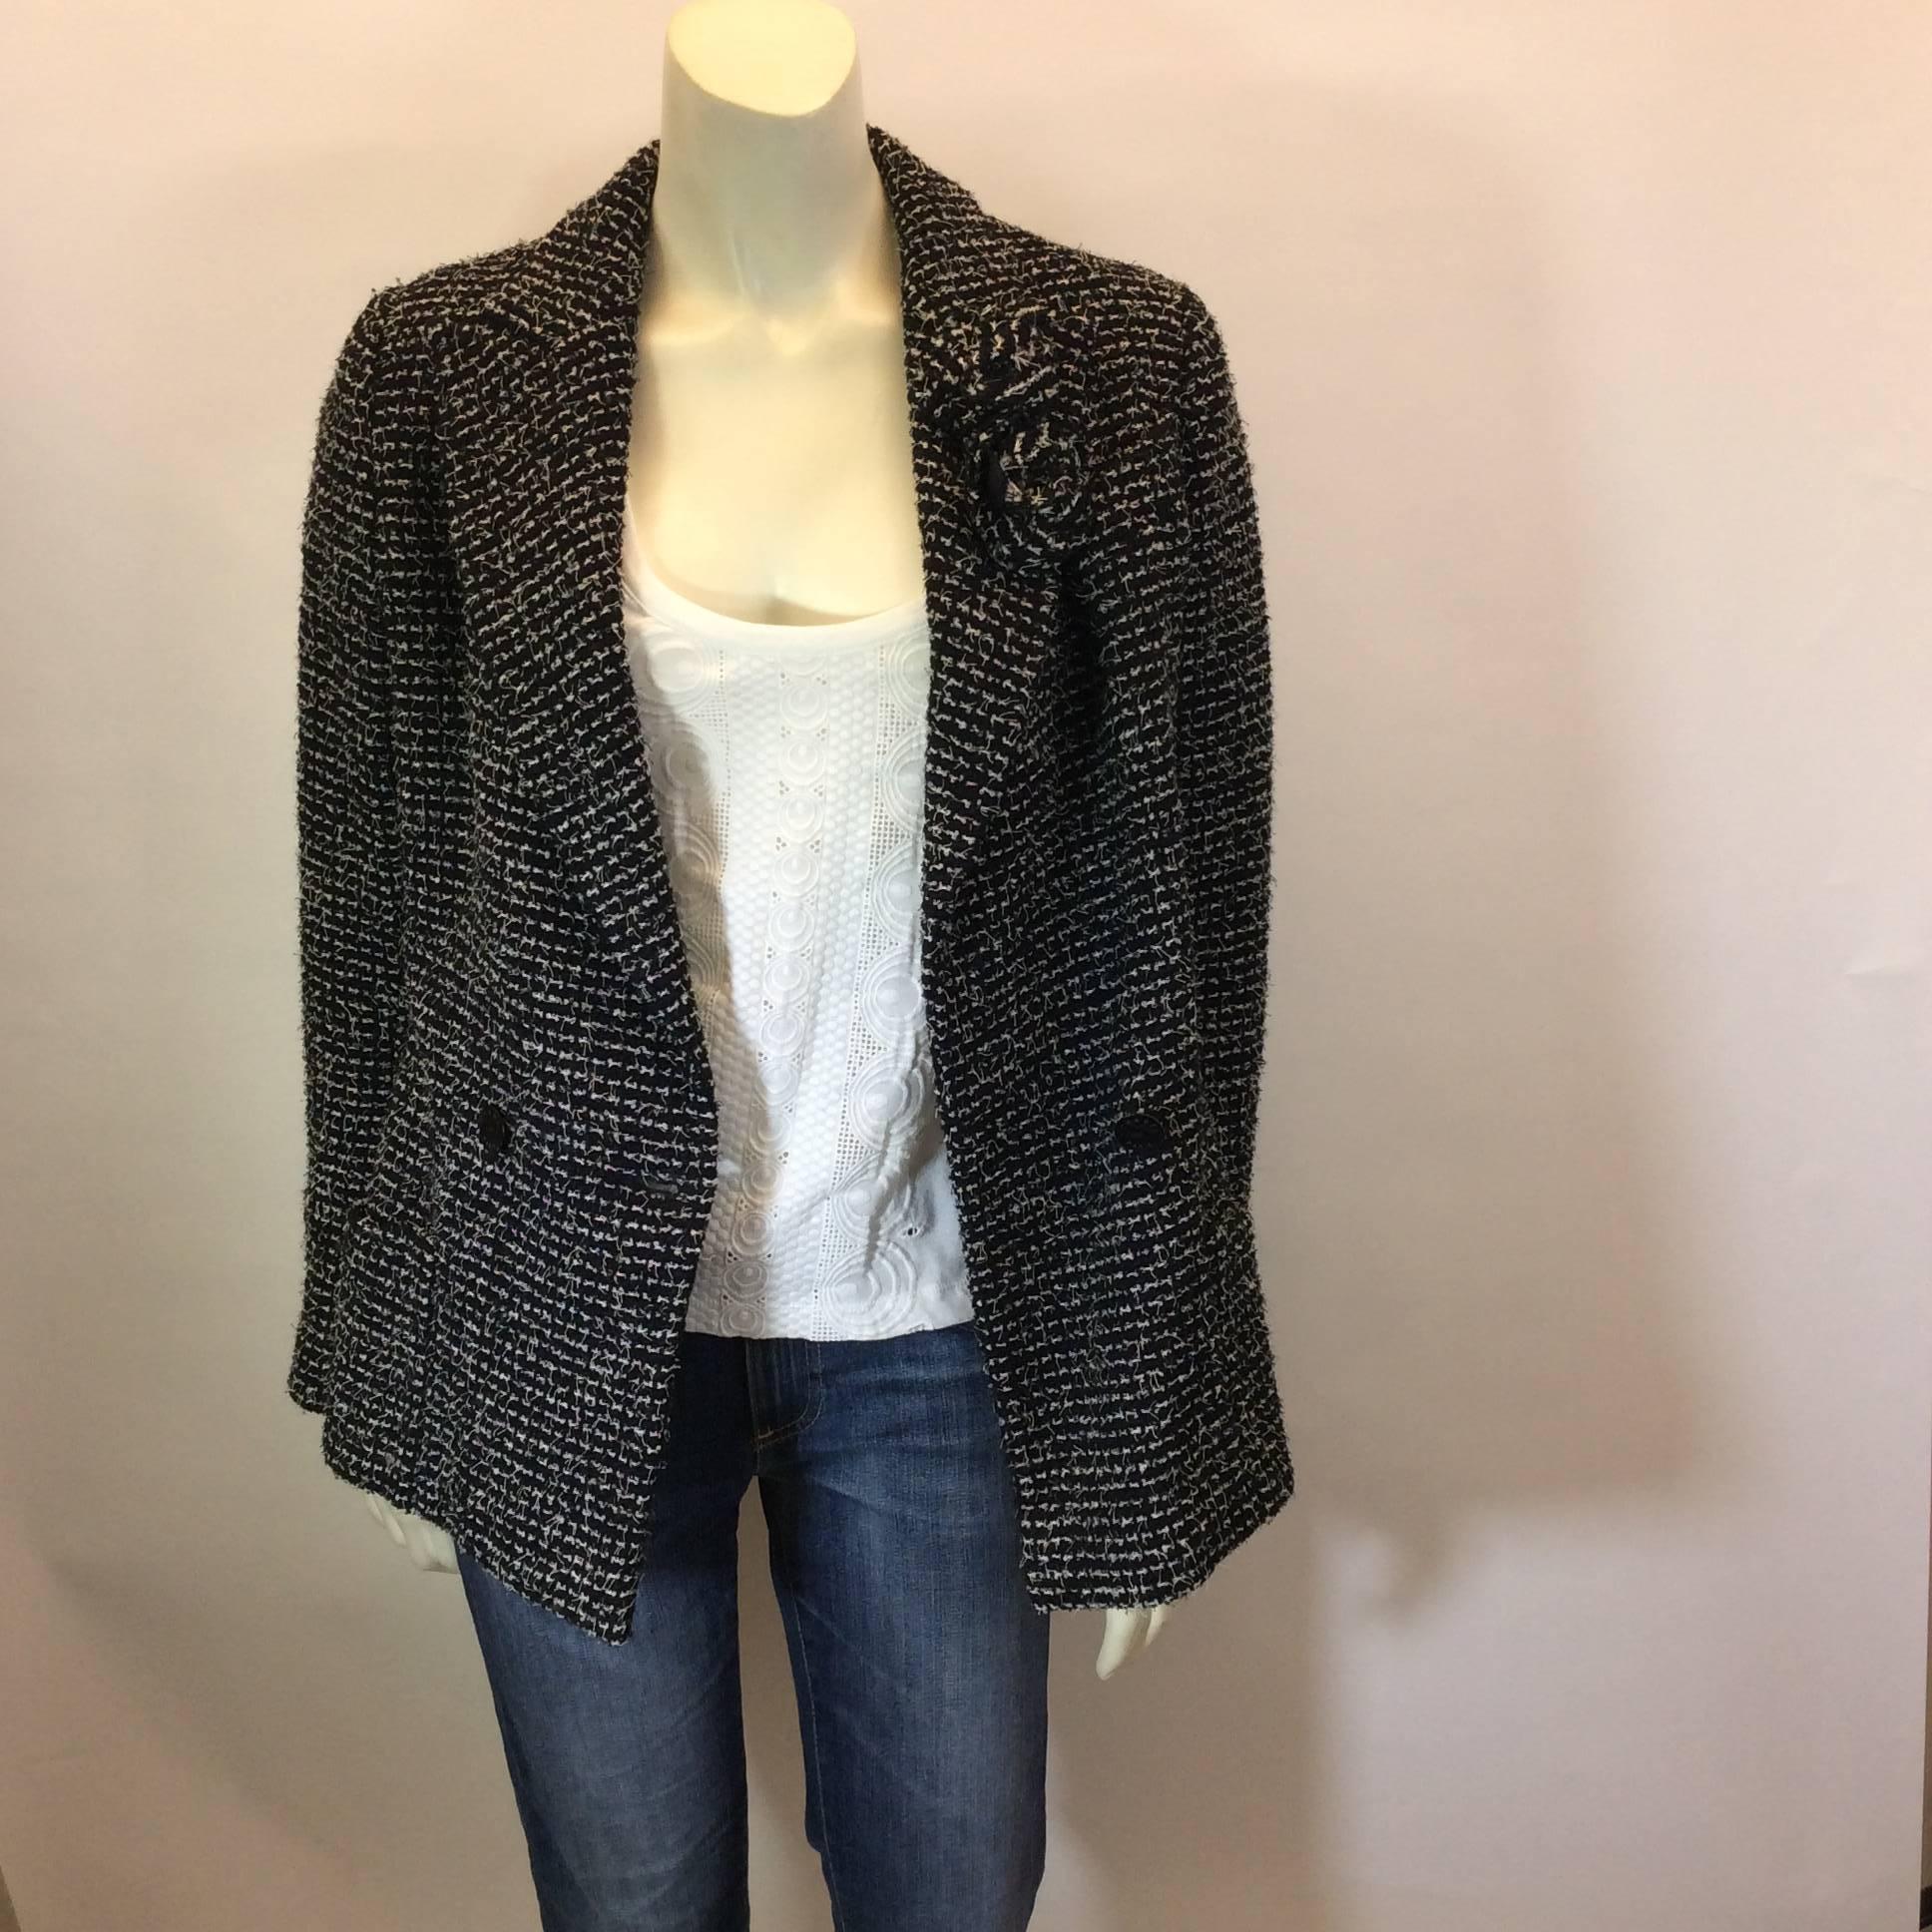 Black and White Sequined Tweed Jacket with Florettes
One button closure on jacket front
Two removable tweed florettes on collar 
3 button cuff
Size 38 (equates to US 6)
70% Wool, 30% Nylon with Silk and Spandex Lining